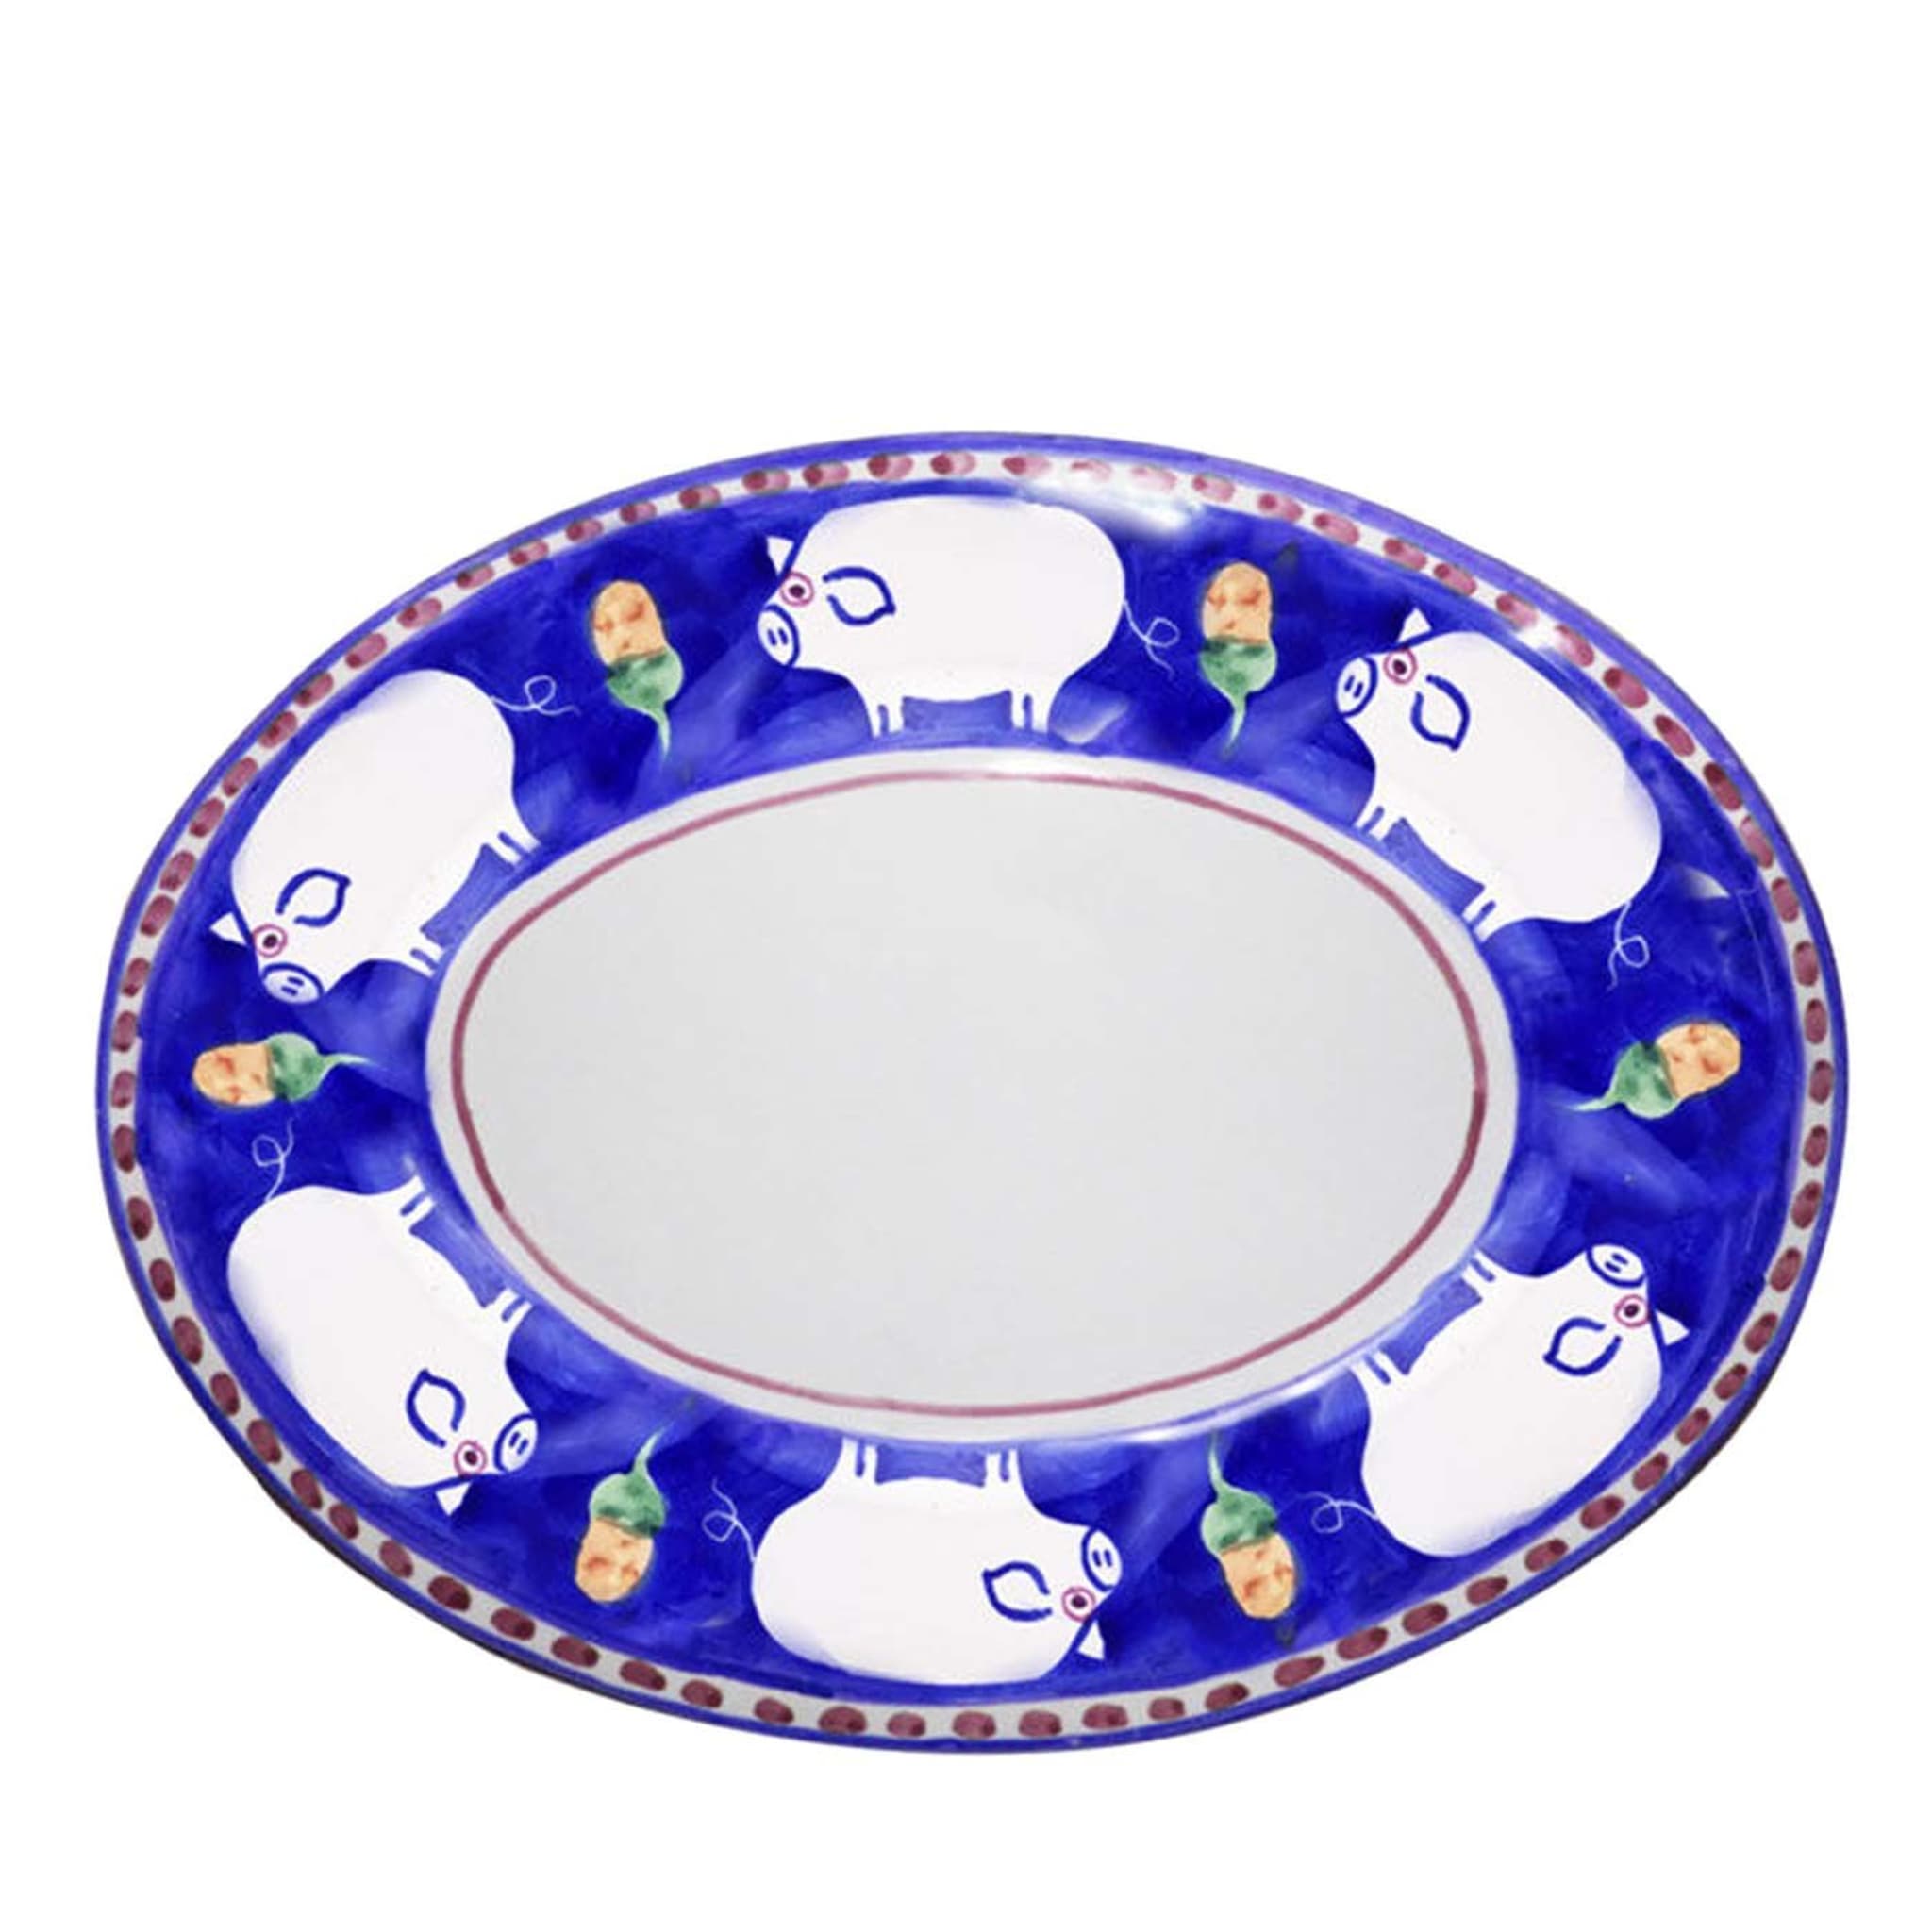 Cortile Oval Blue Tray 43cm - Main view